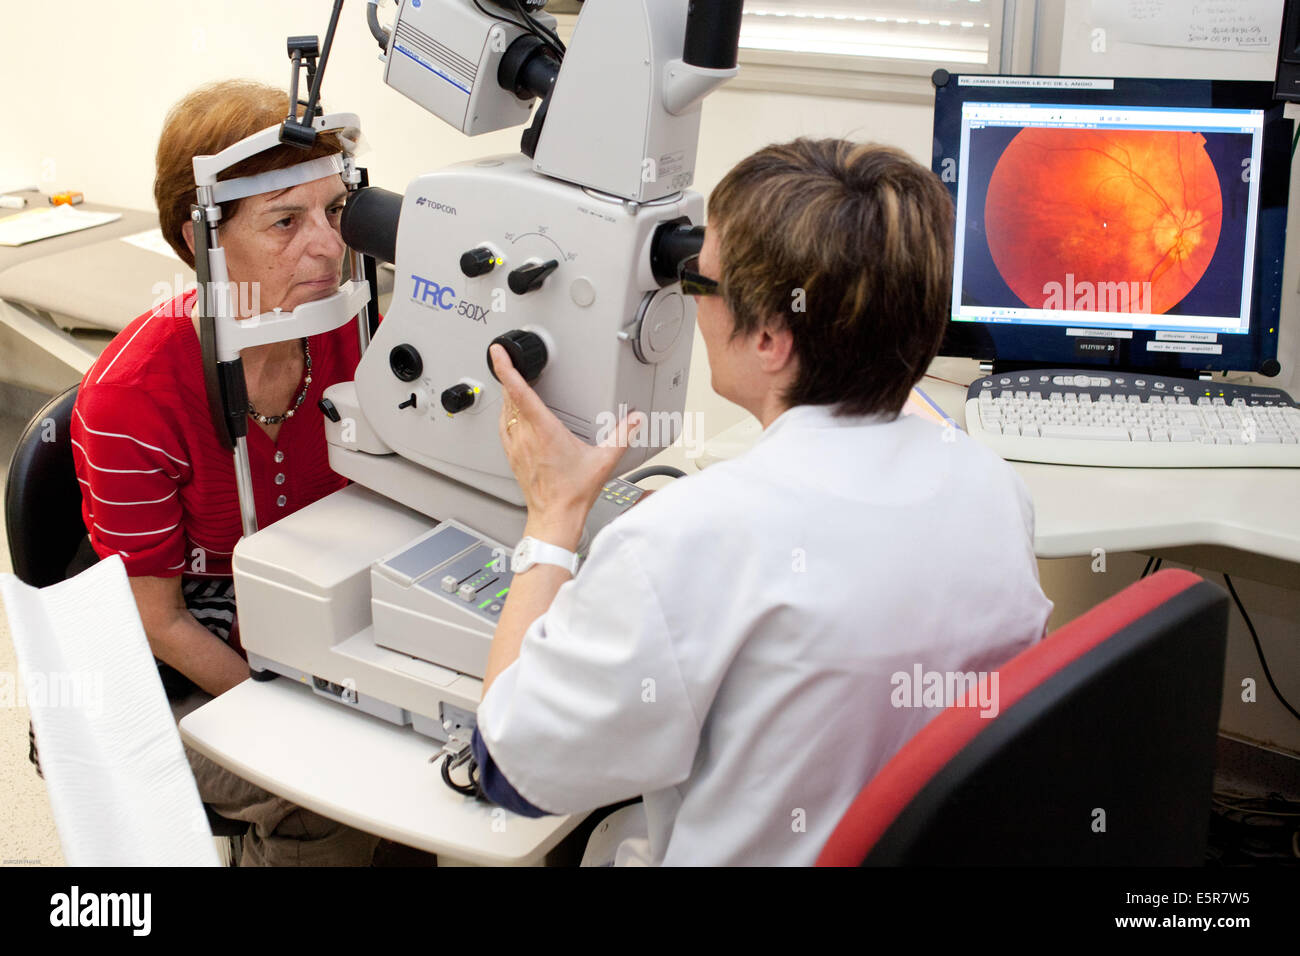 Patient undergoing eye laser fluorescein angiography, Department of Ophthalmology of Pellegrin hospital, Bordeaux, France. Stock Photo